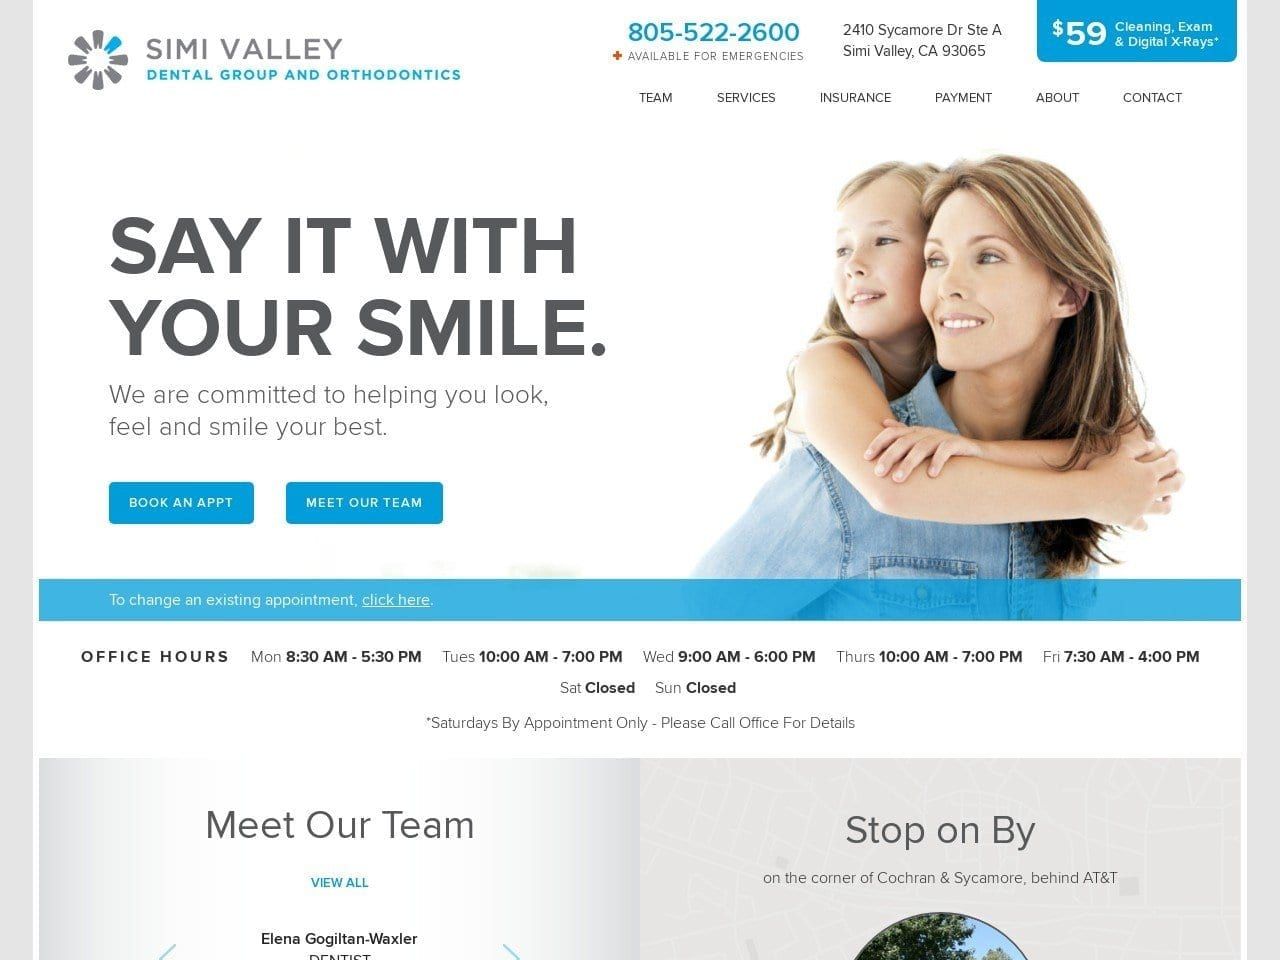 Simi Valley Dental Group Rodgers Charles DDS Website Screenshot from simivalleydental.com